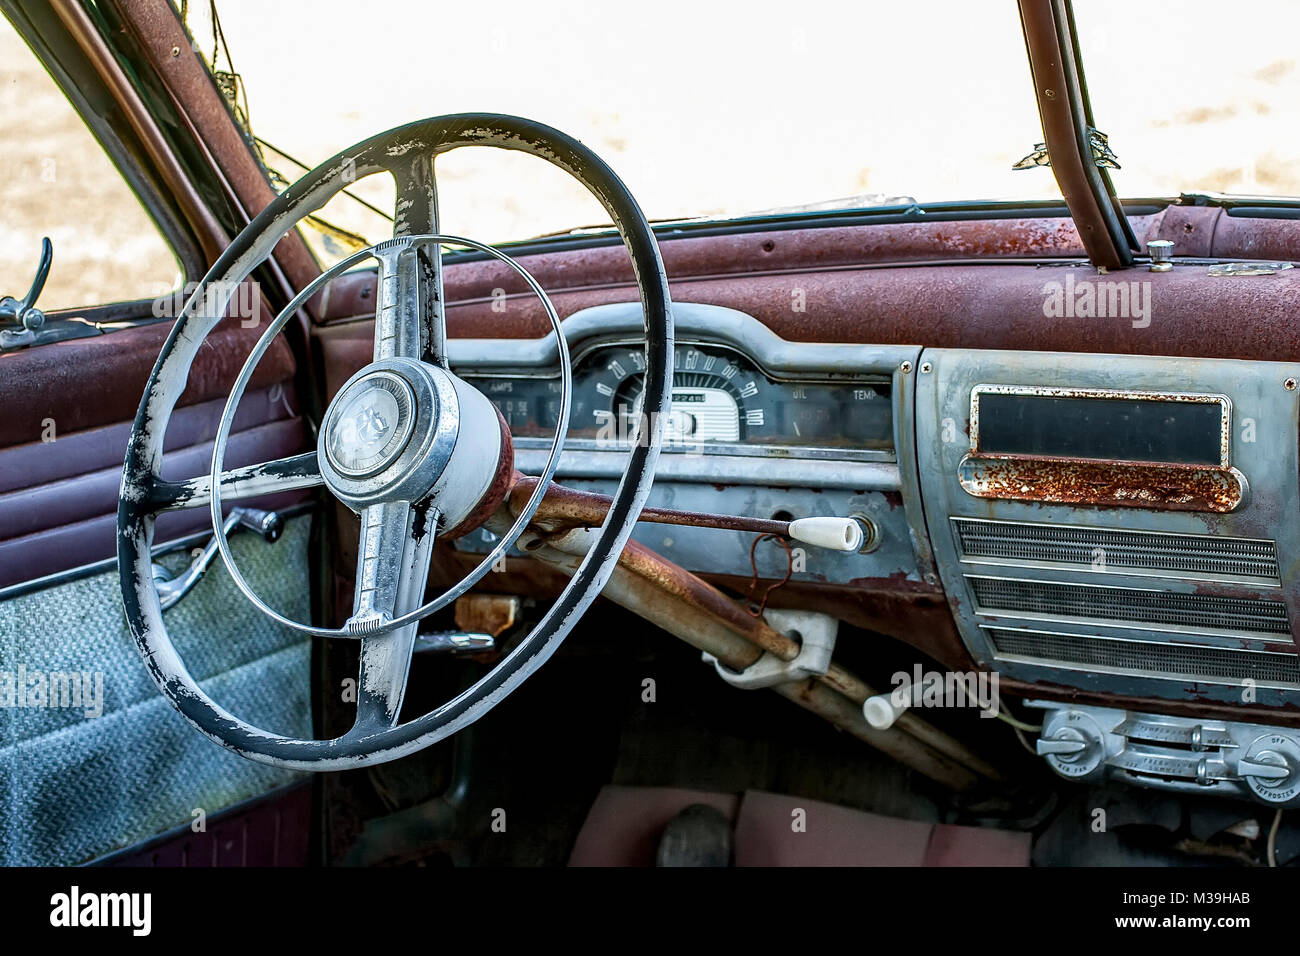 Interior of an old, rusted  and abandoned Plymouth automobile with old-fashioned steering wheel with sailboat logo. Stock Photo